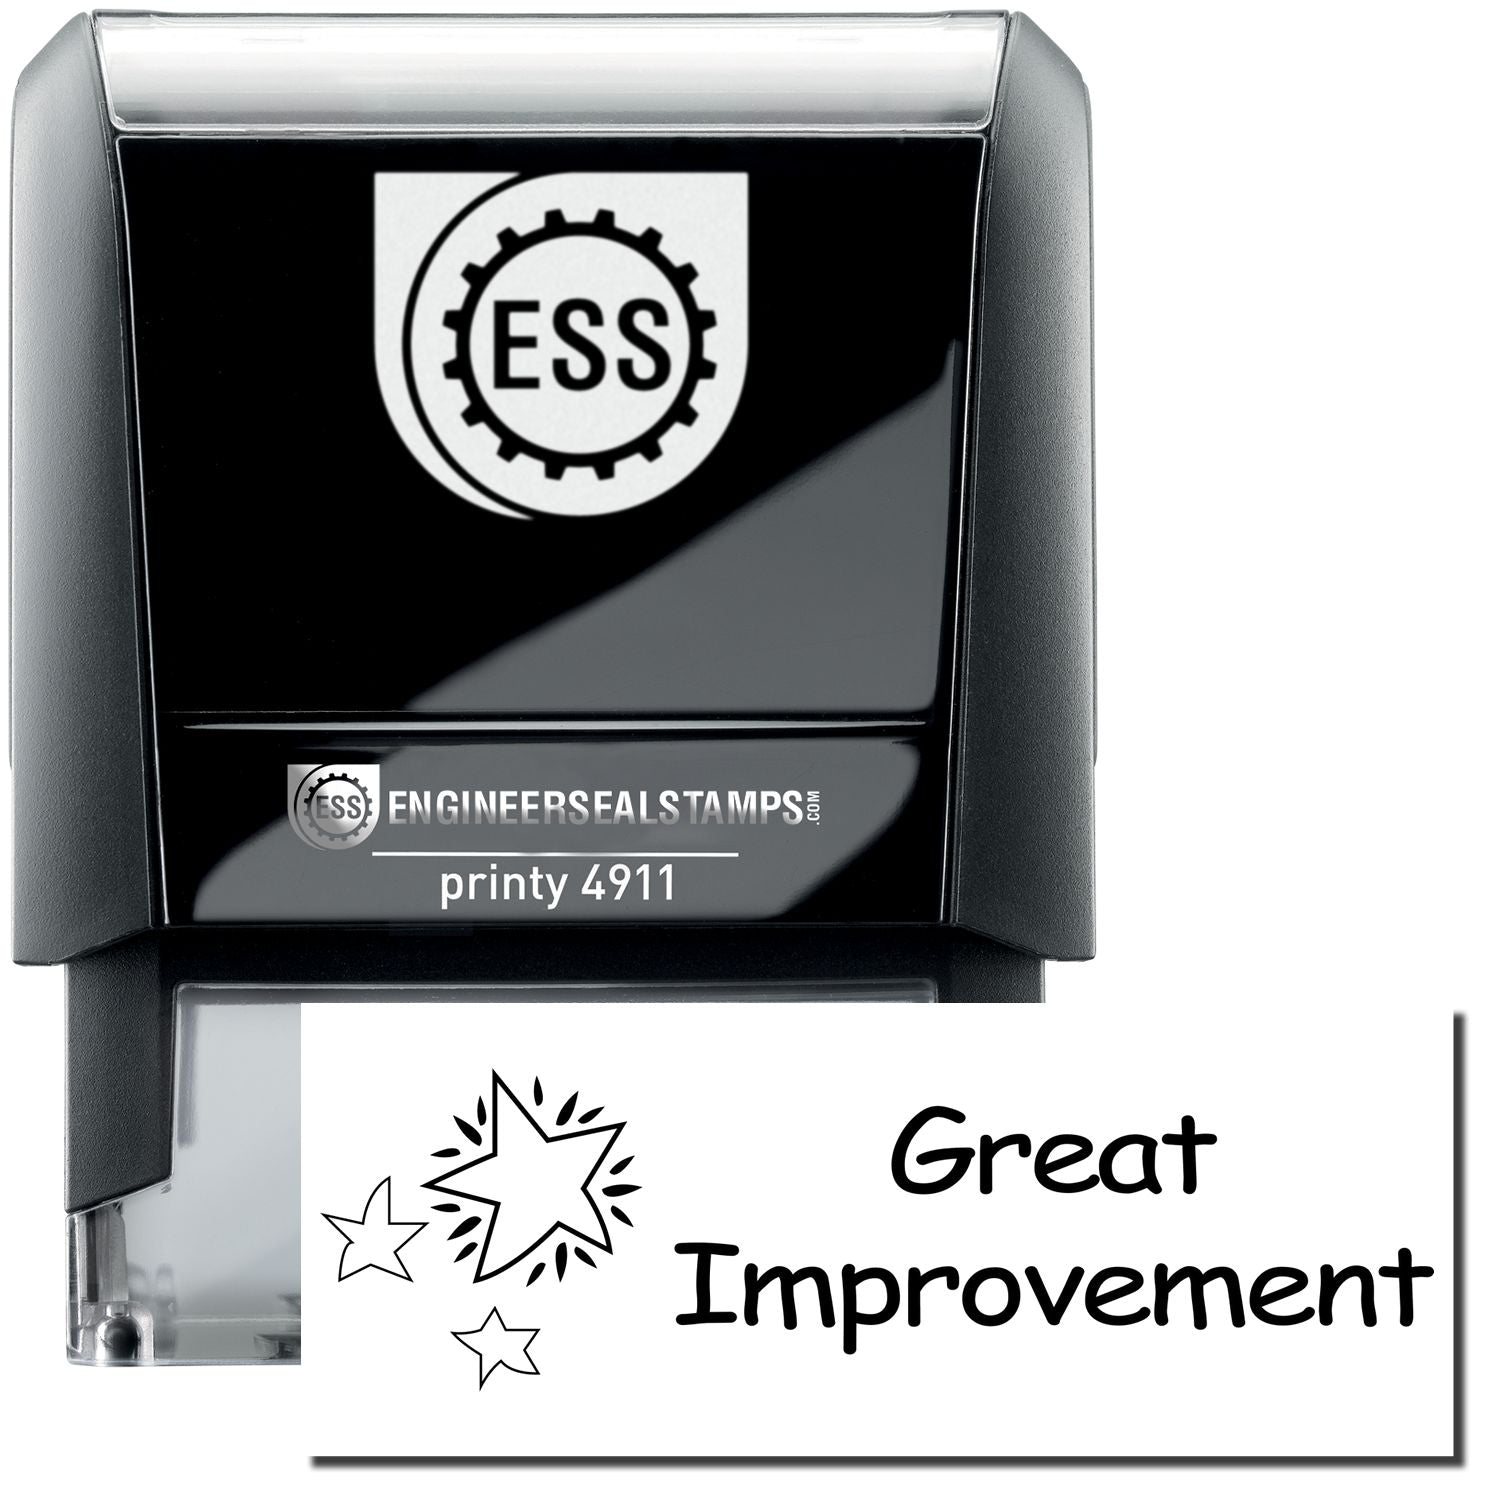 A self-inking stamp with a stamped image showing how the text "Great Improvement" in a whimsical font with a trio of stars on the left side is displayed after stamping.